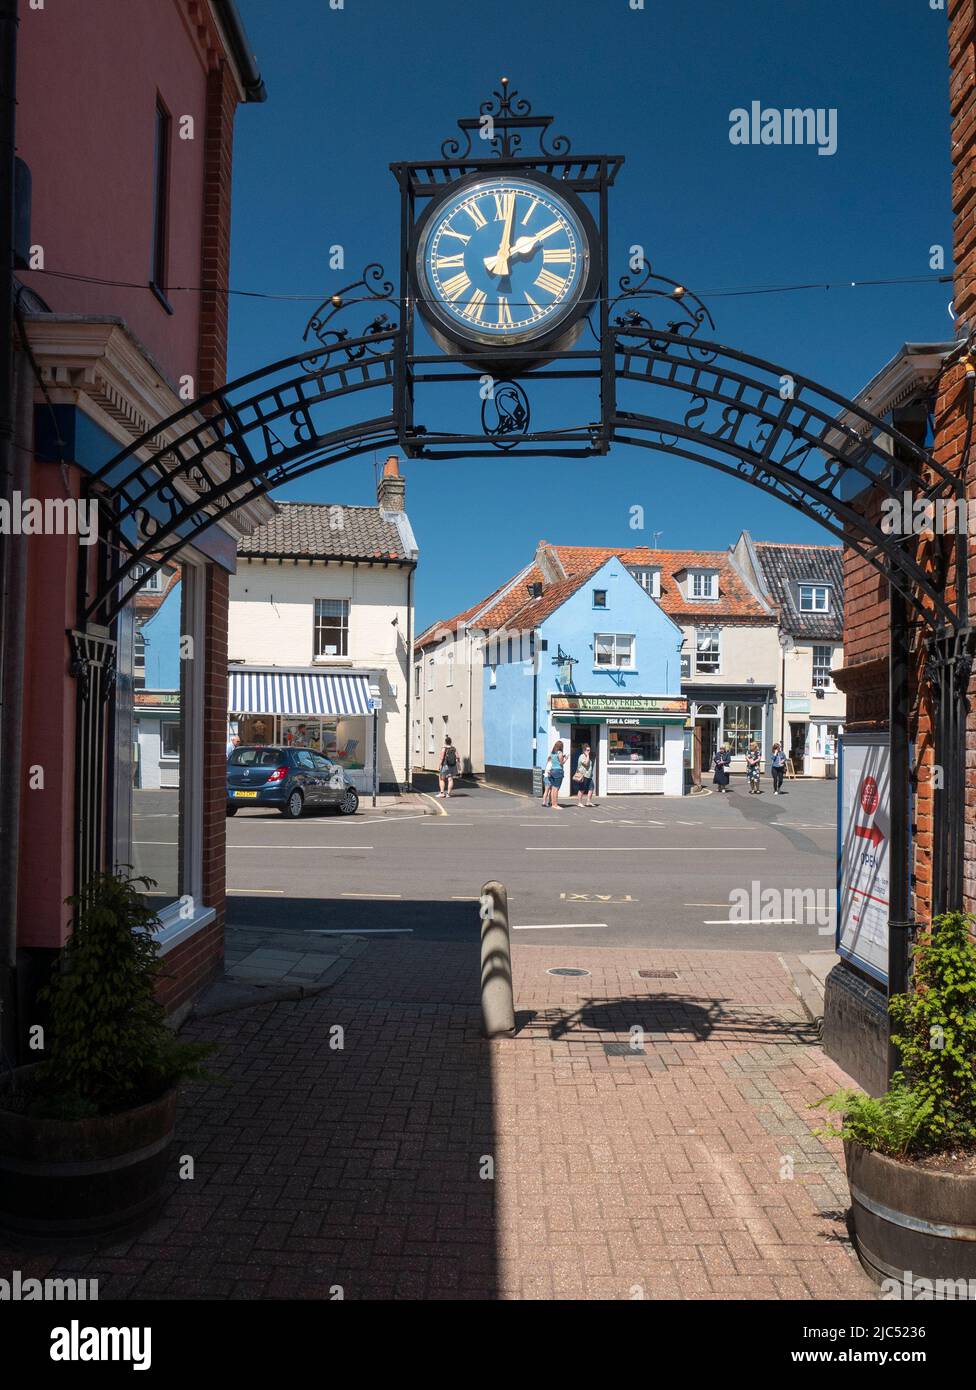 Ornate clock and local shops in Hilt Nofolk Stock Photo